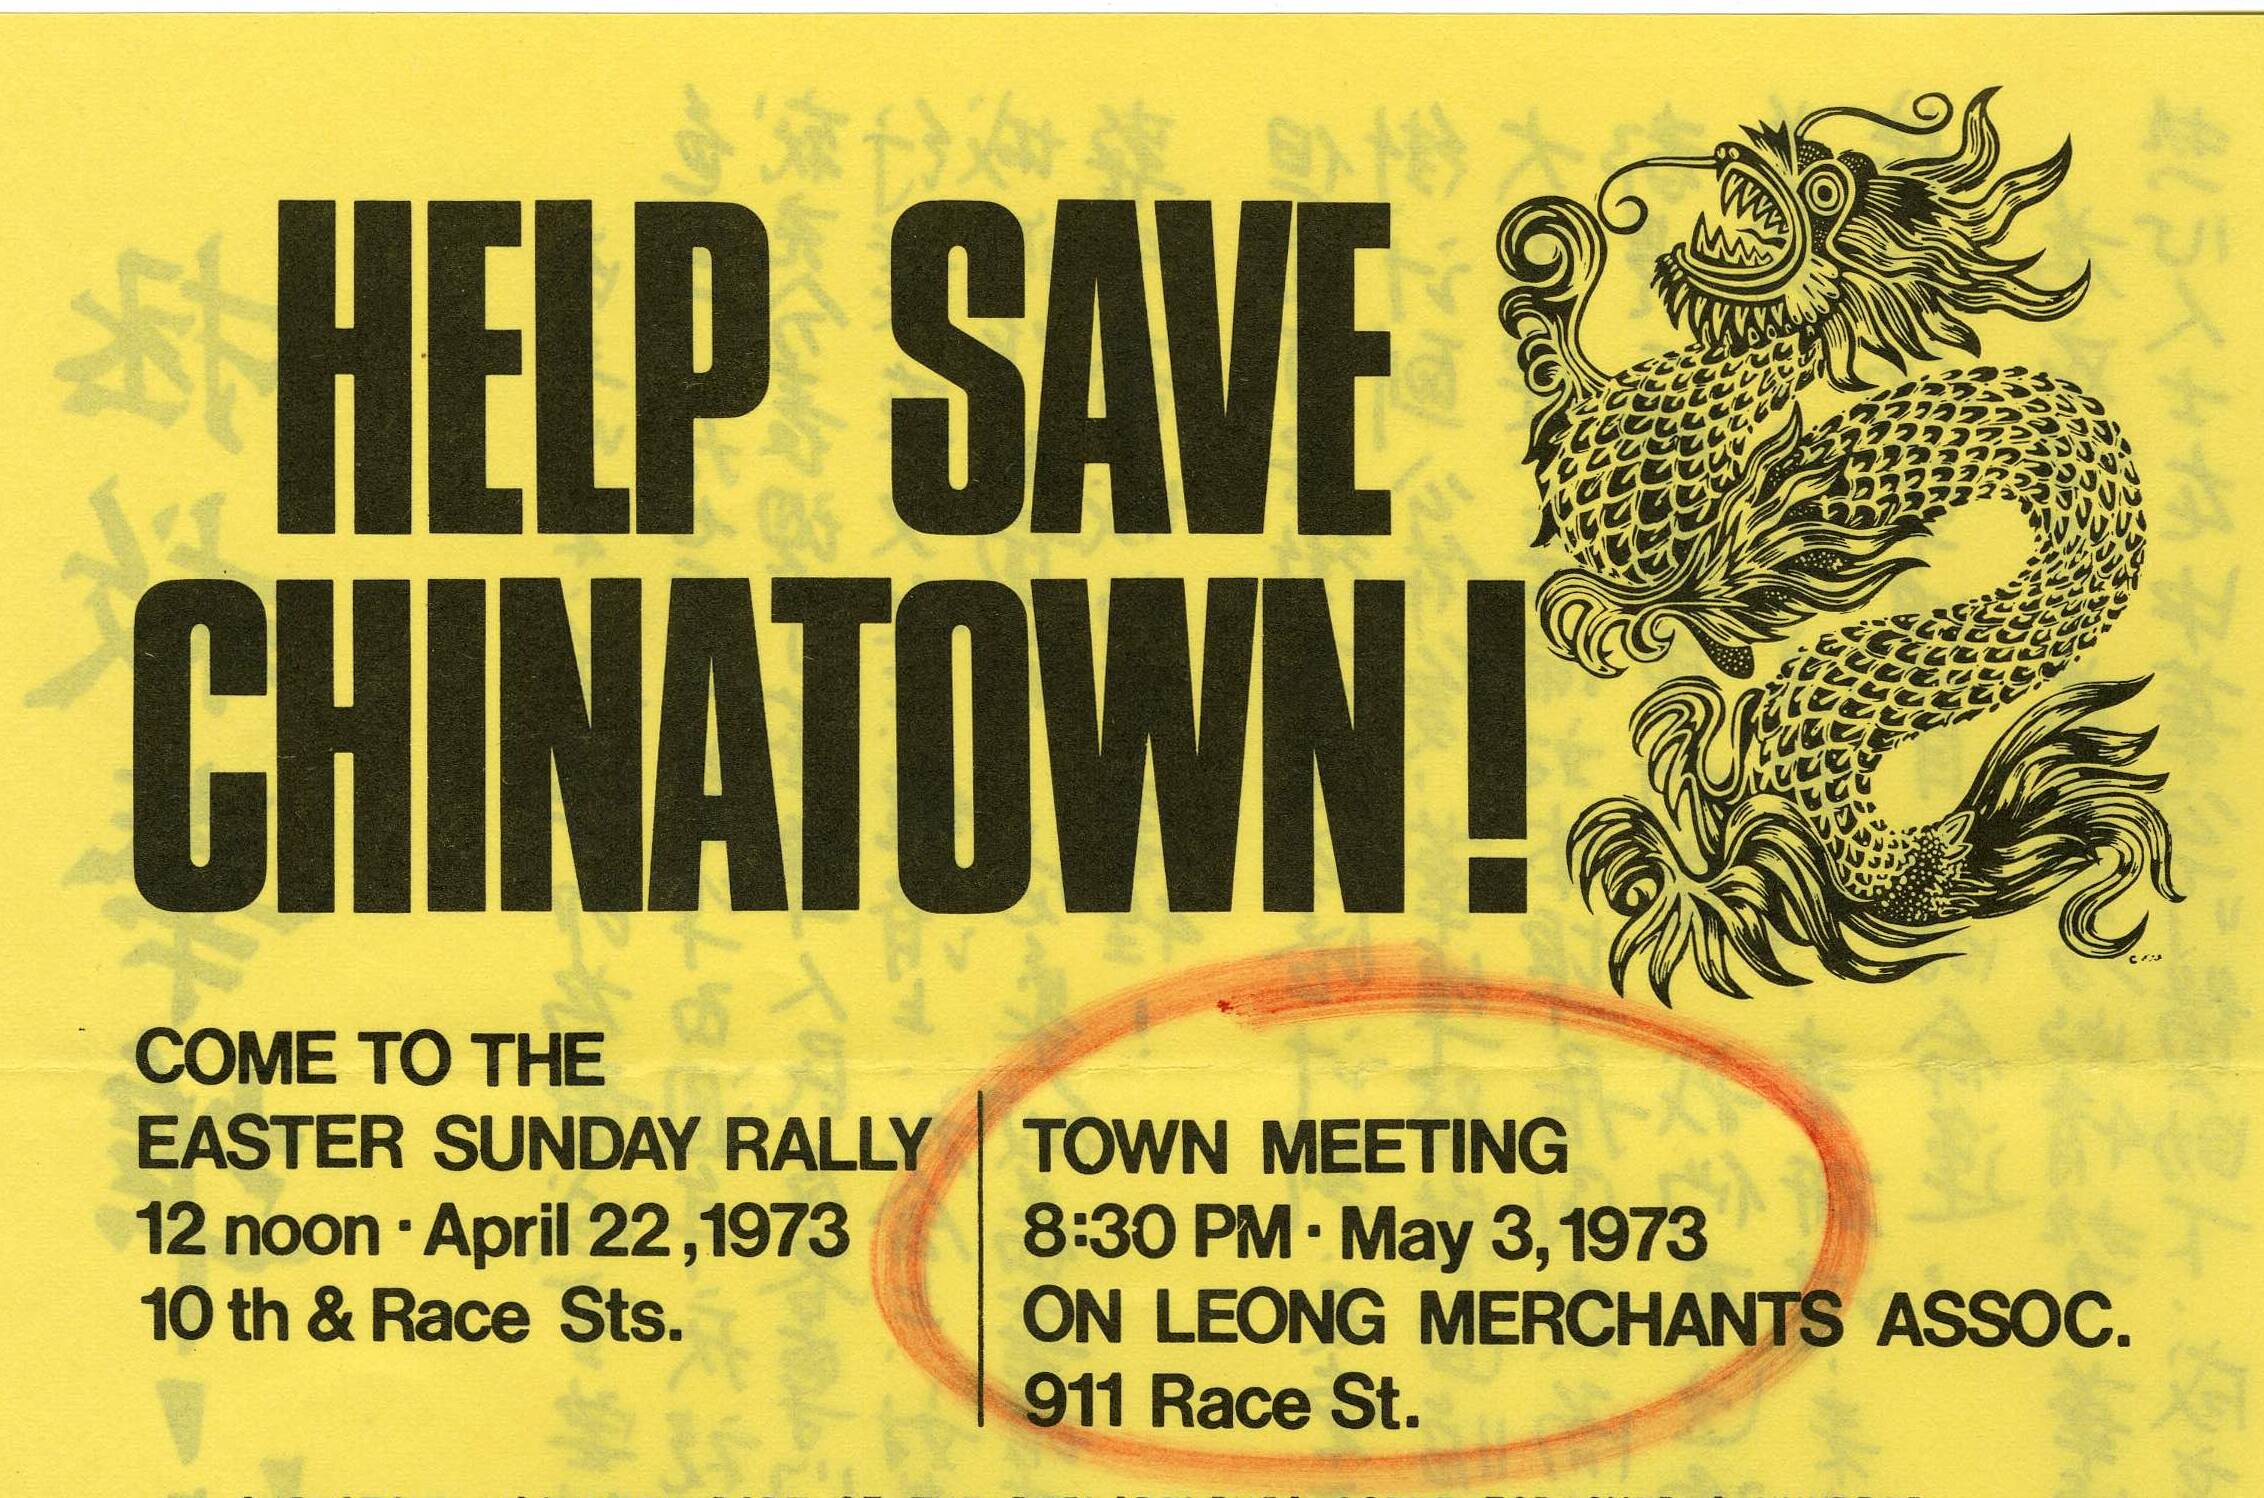 Help Save Chinatown! Flier from 1973